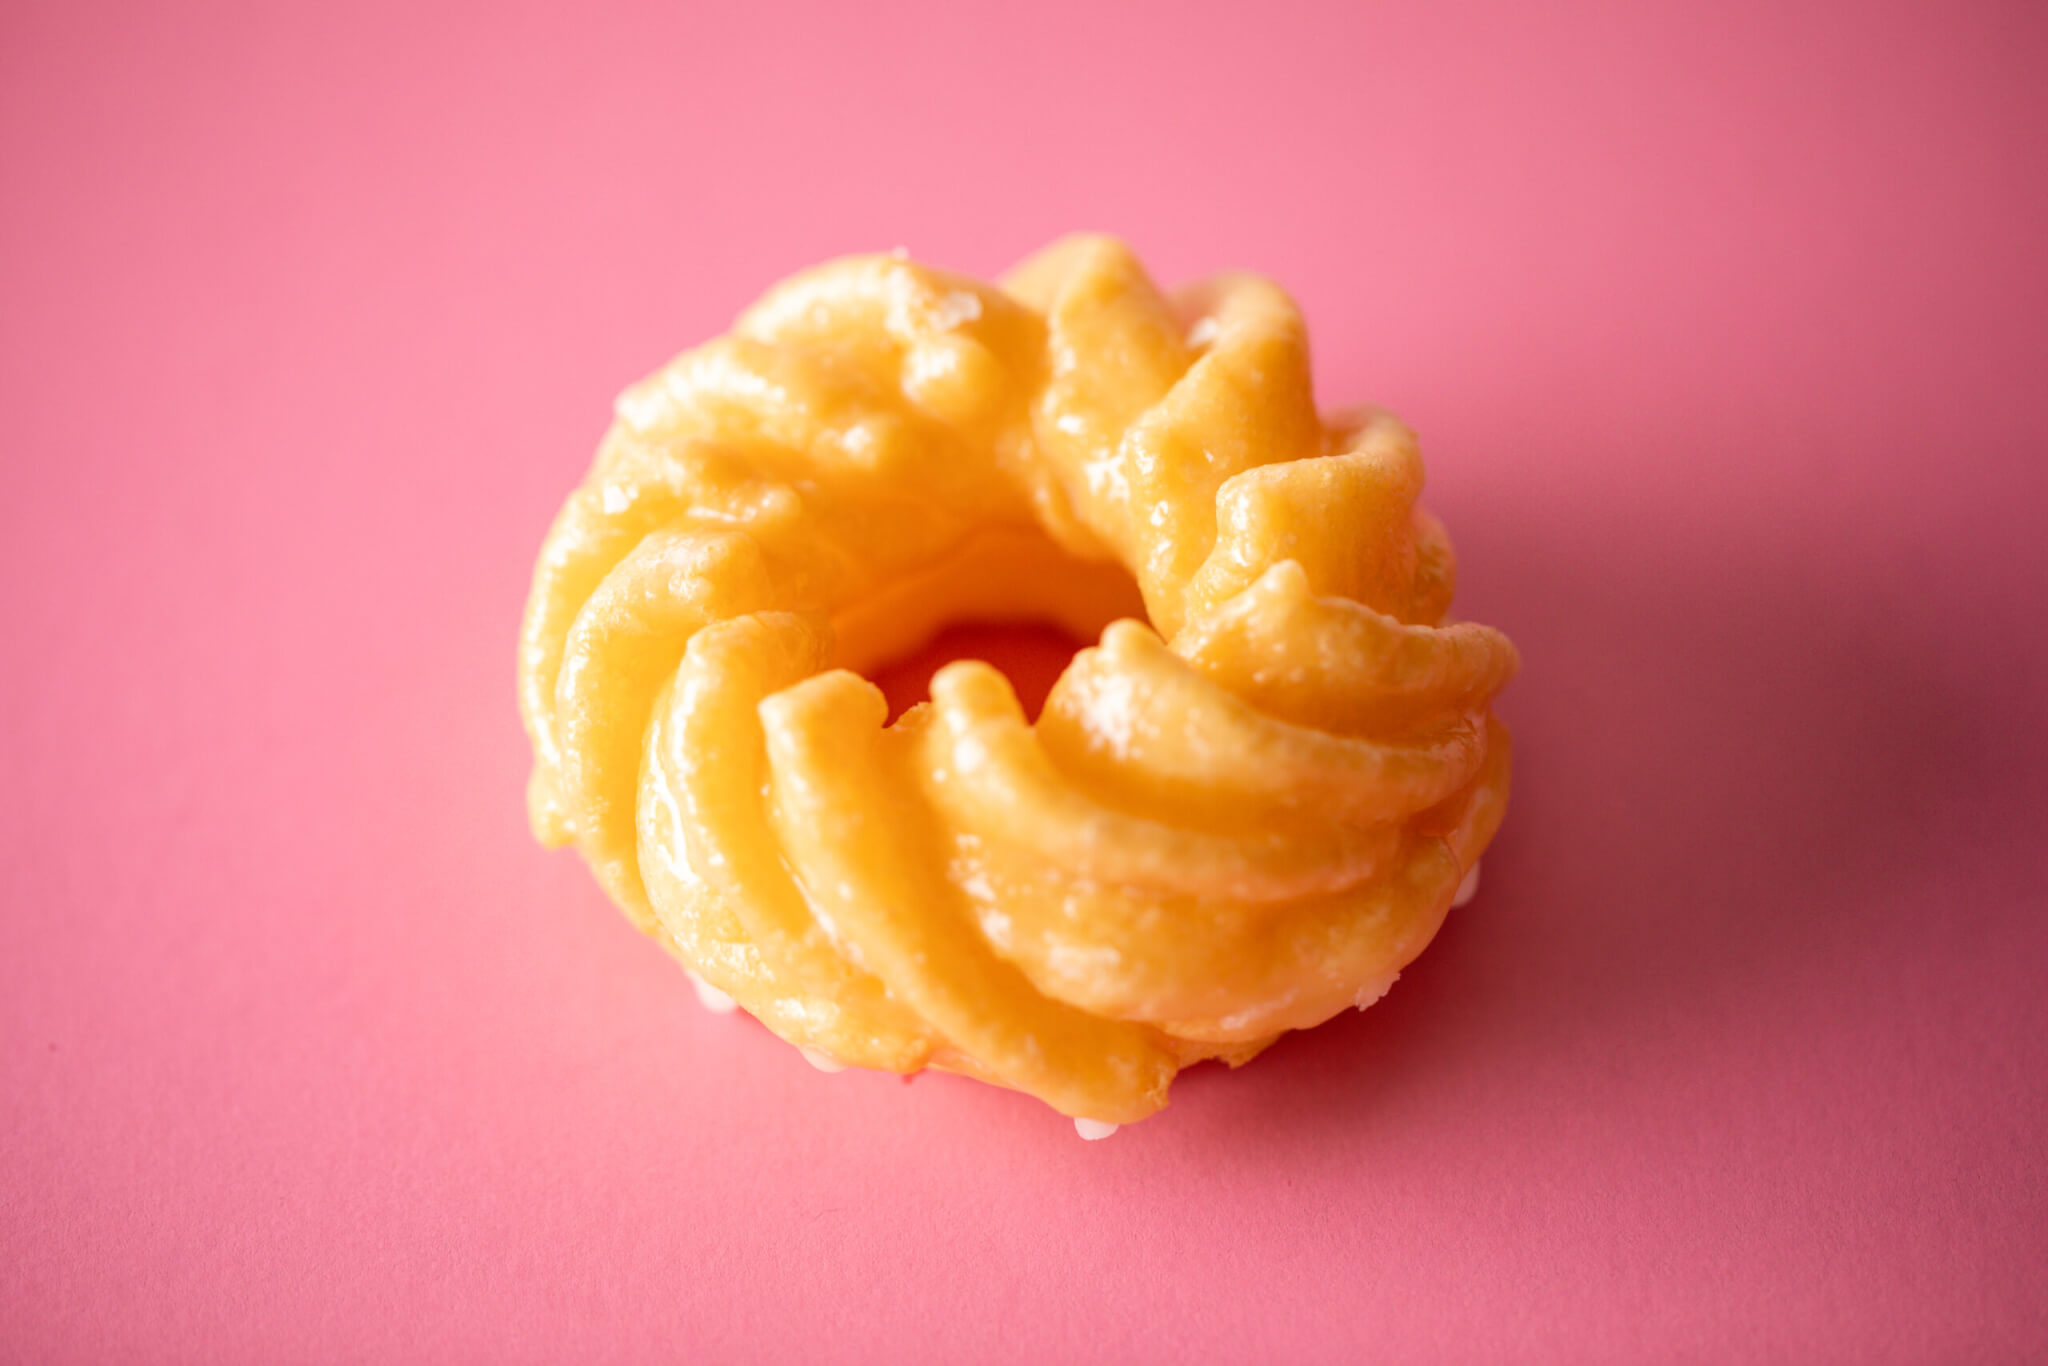 French cruller donut